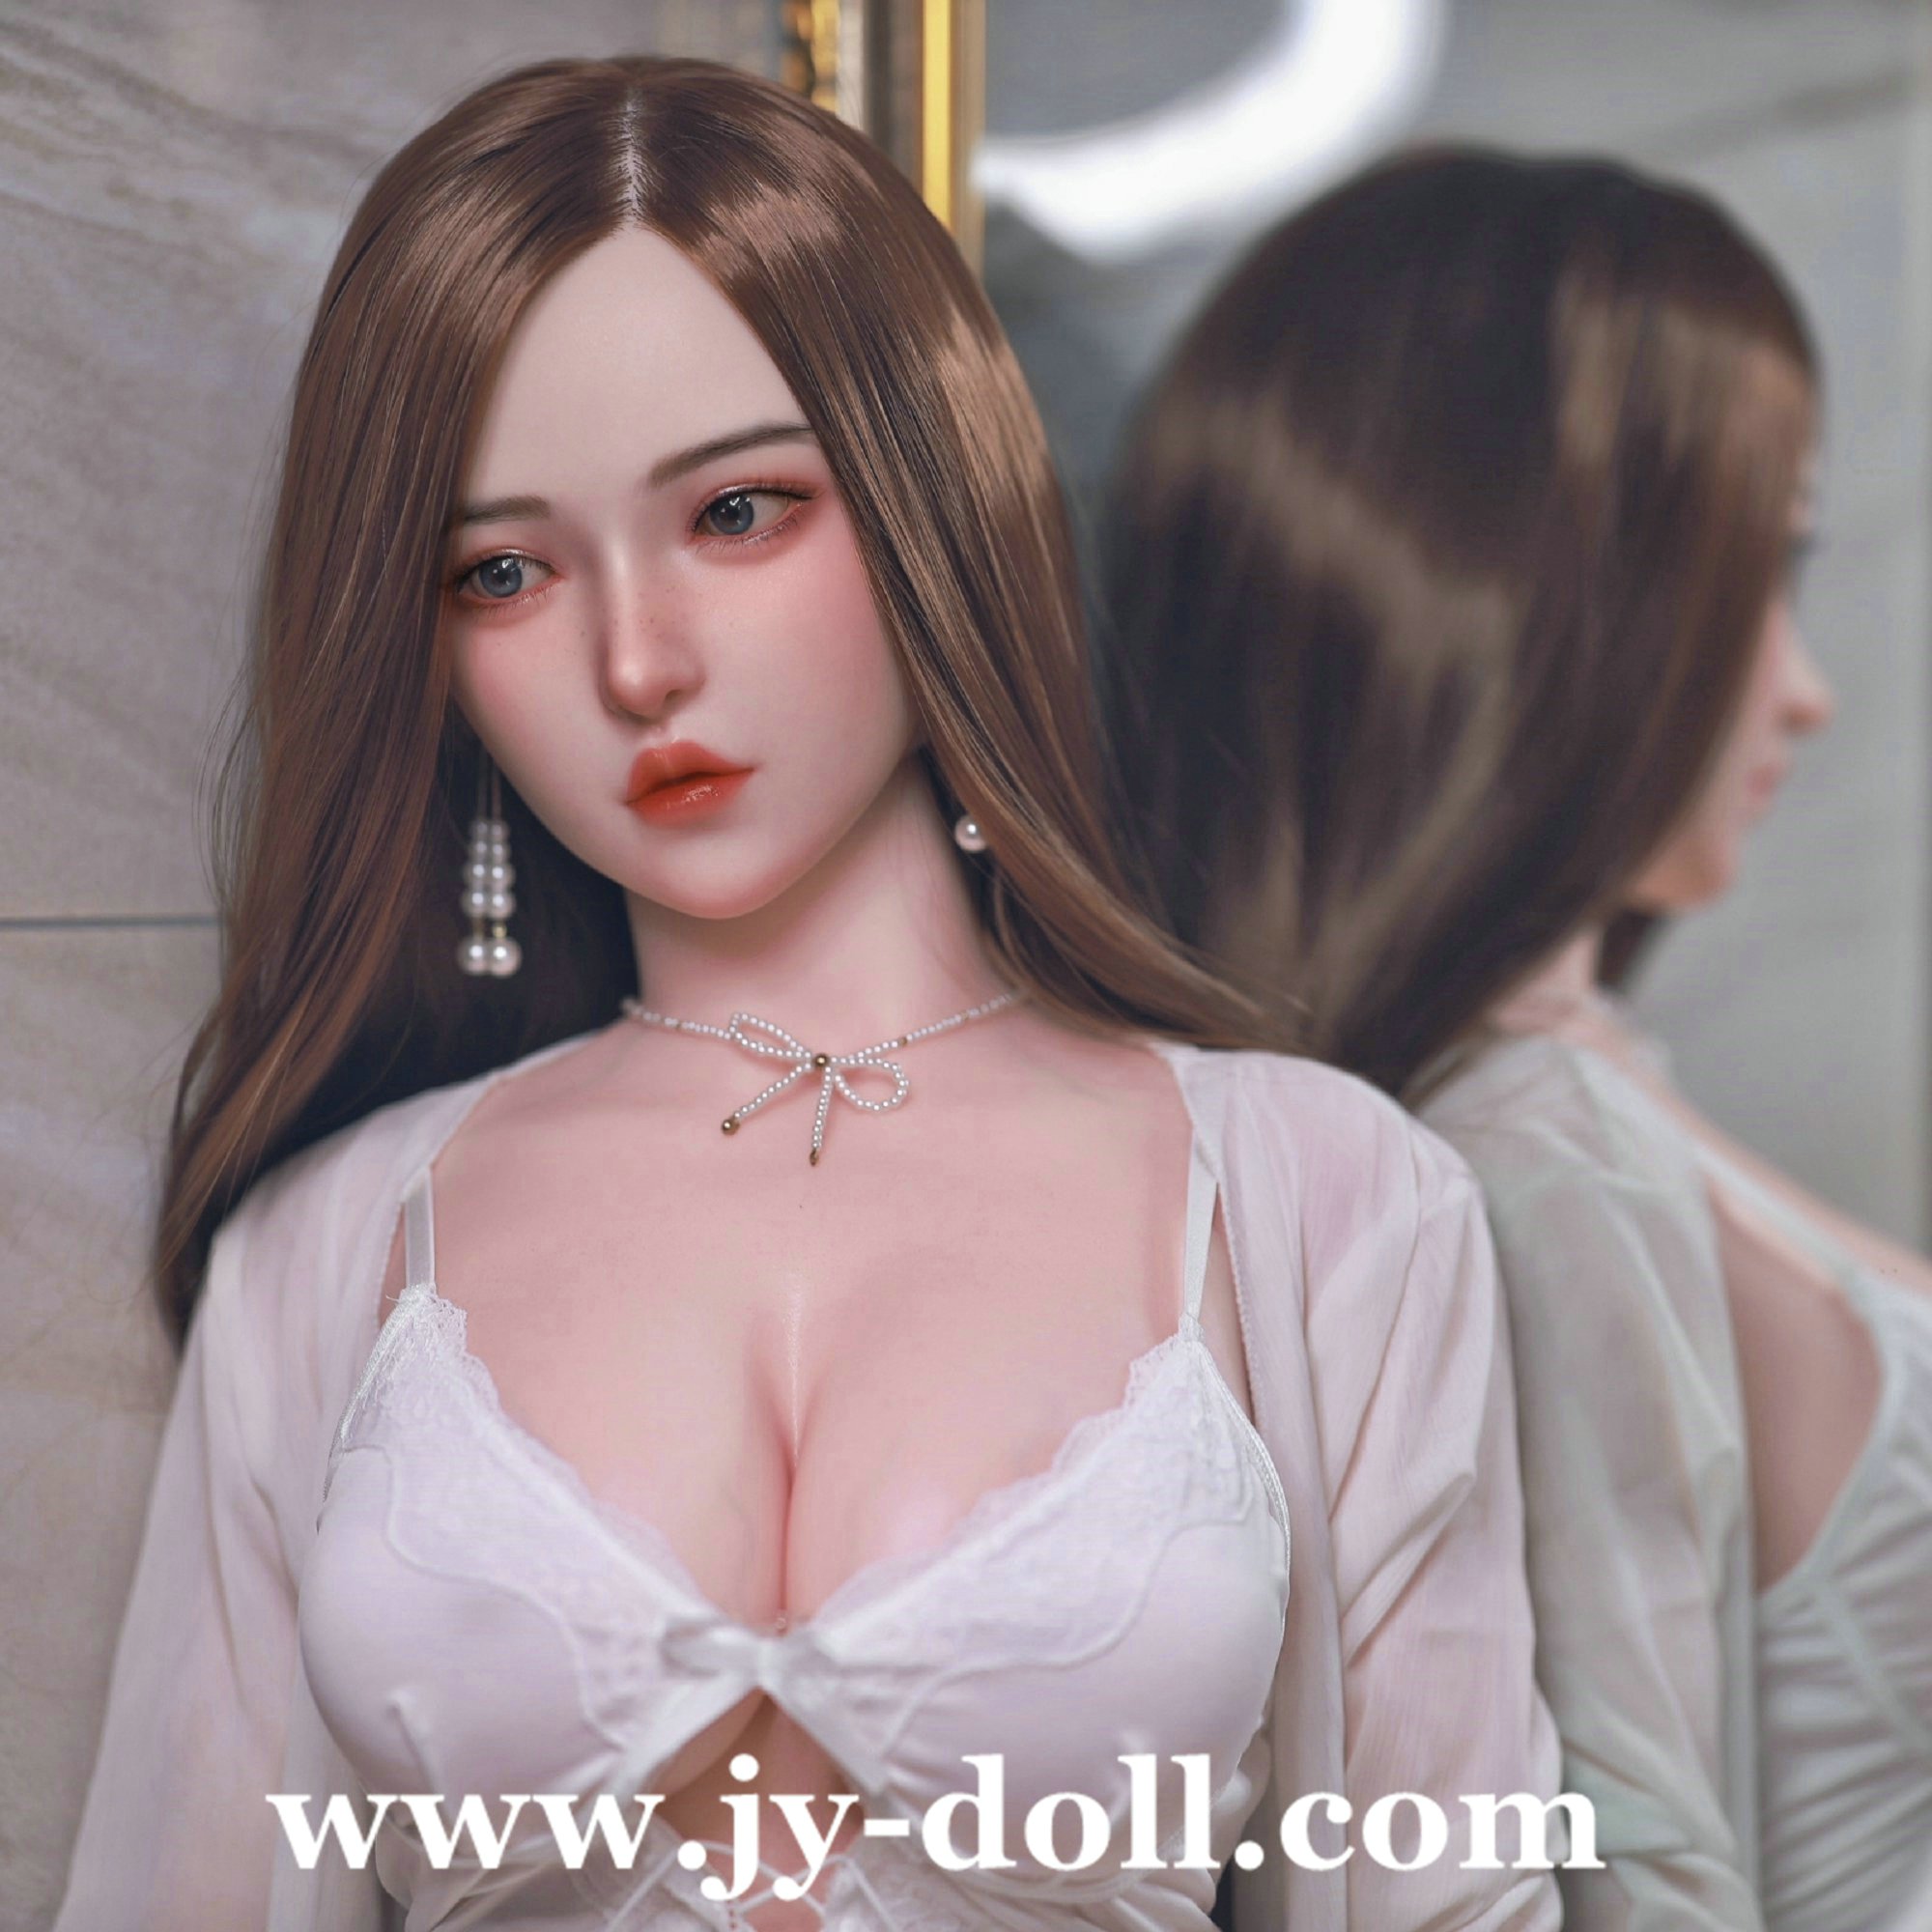 JY DOLL full silicone torso doll with hands Ann